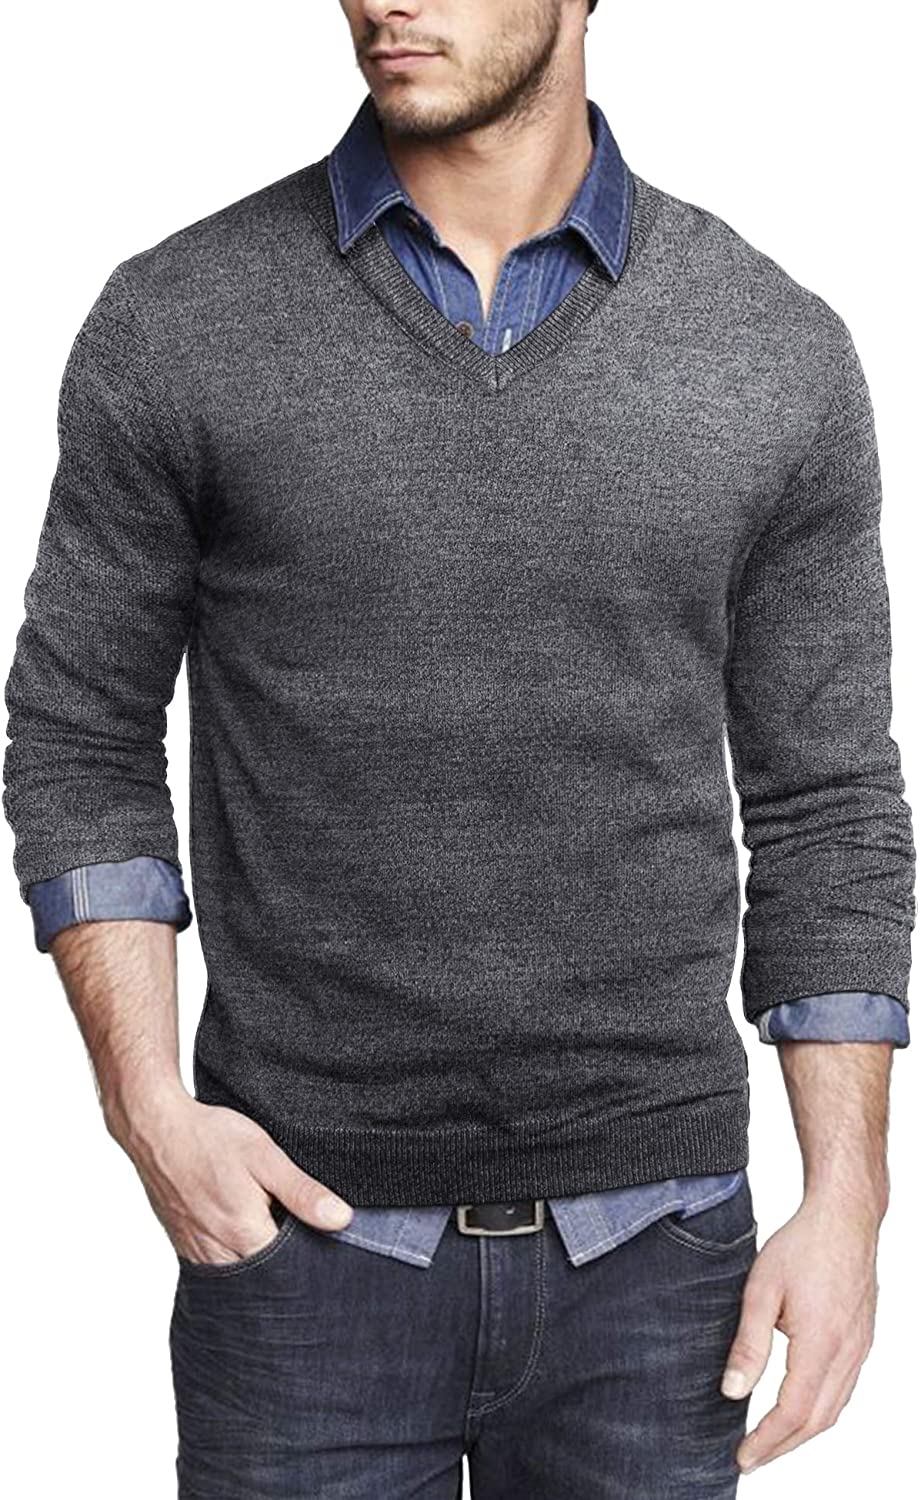 COOFANDY Men Casual V Neck Sweater Ribbed Knit Slim Fit Long Sleeve Pullover Top Grey